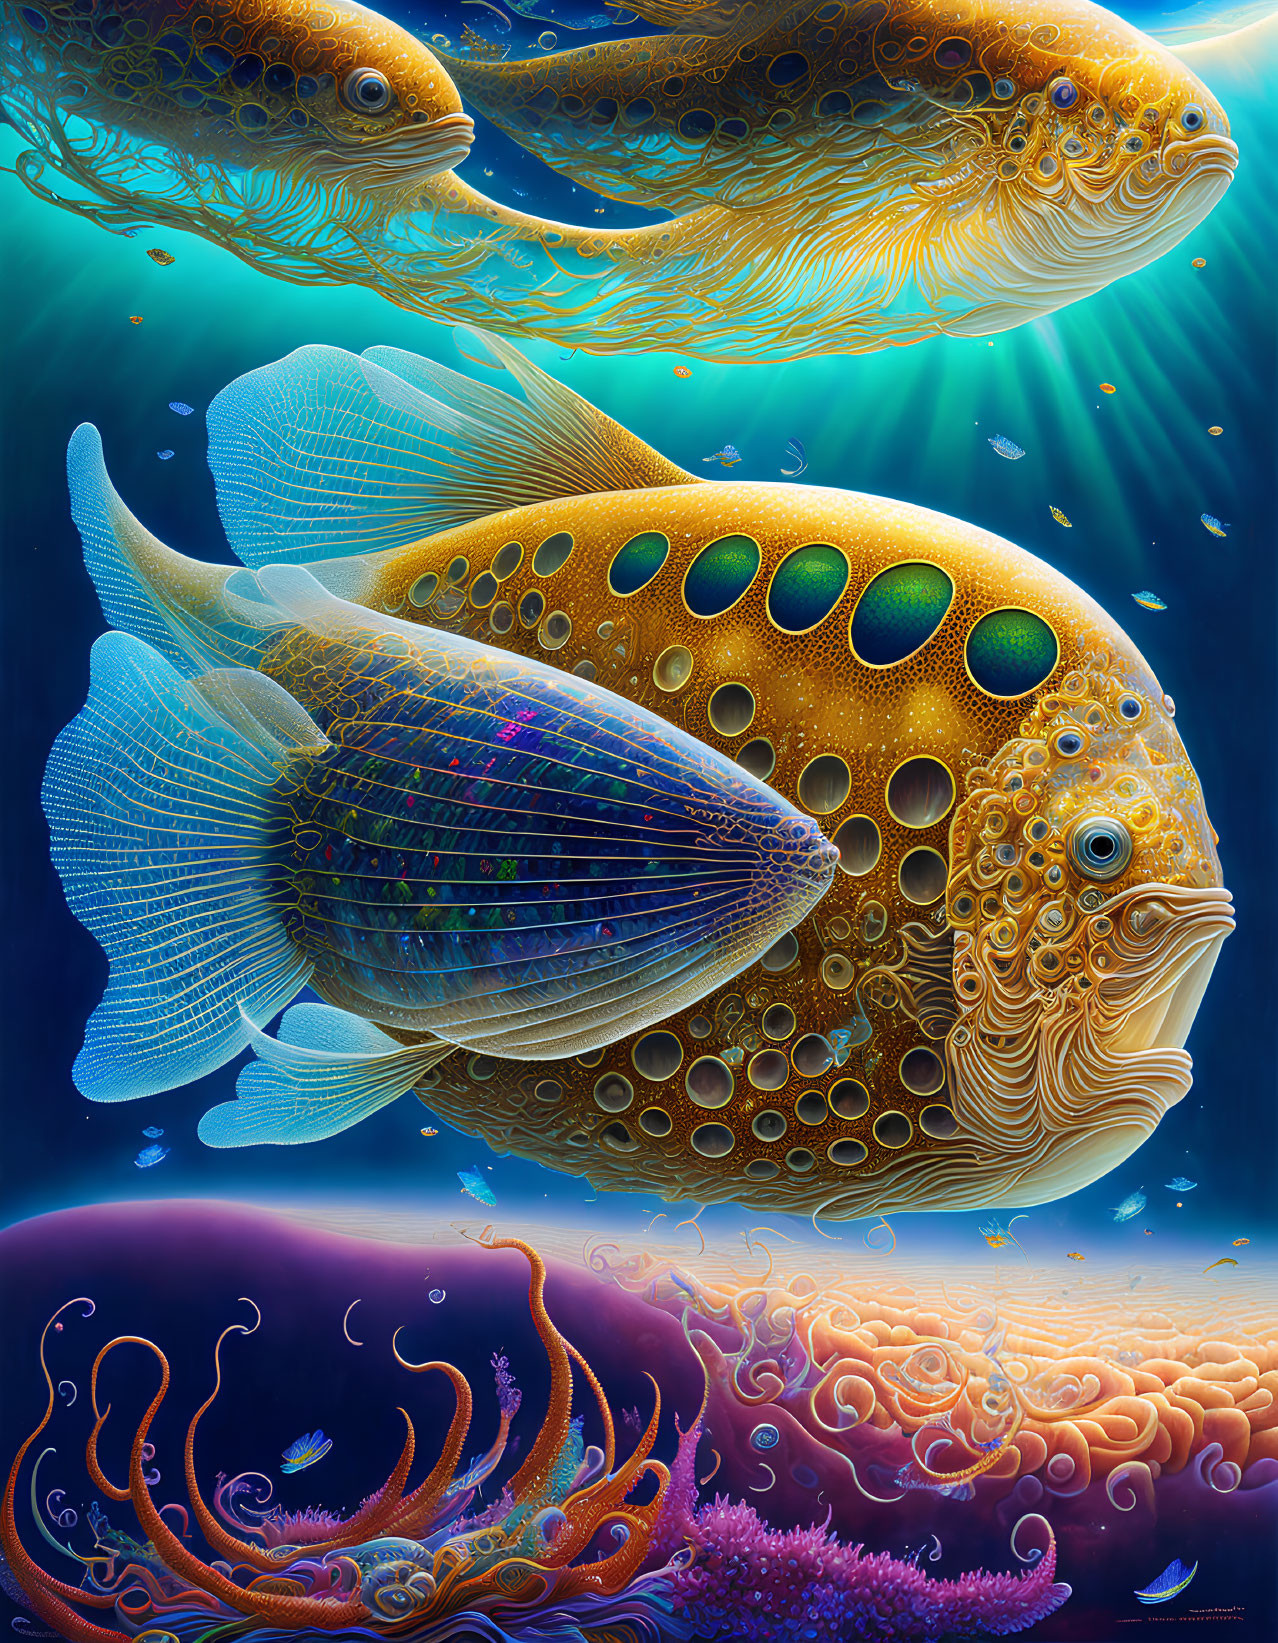 Colorful Fantastical Fish Swimming Among Coral in Ethereal Underwater Scene